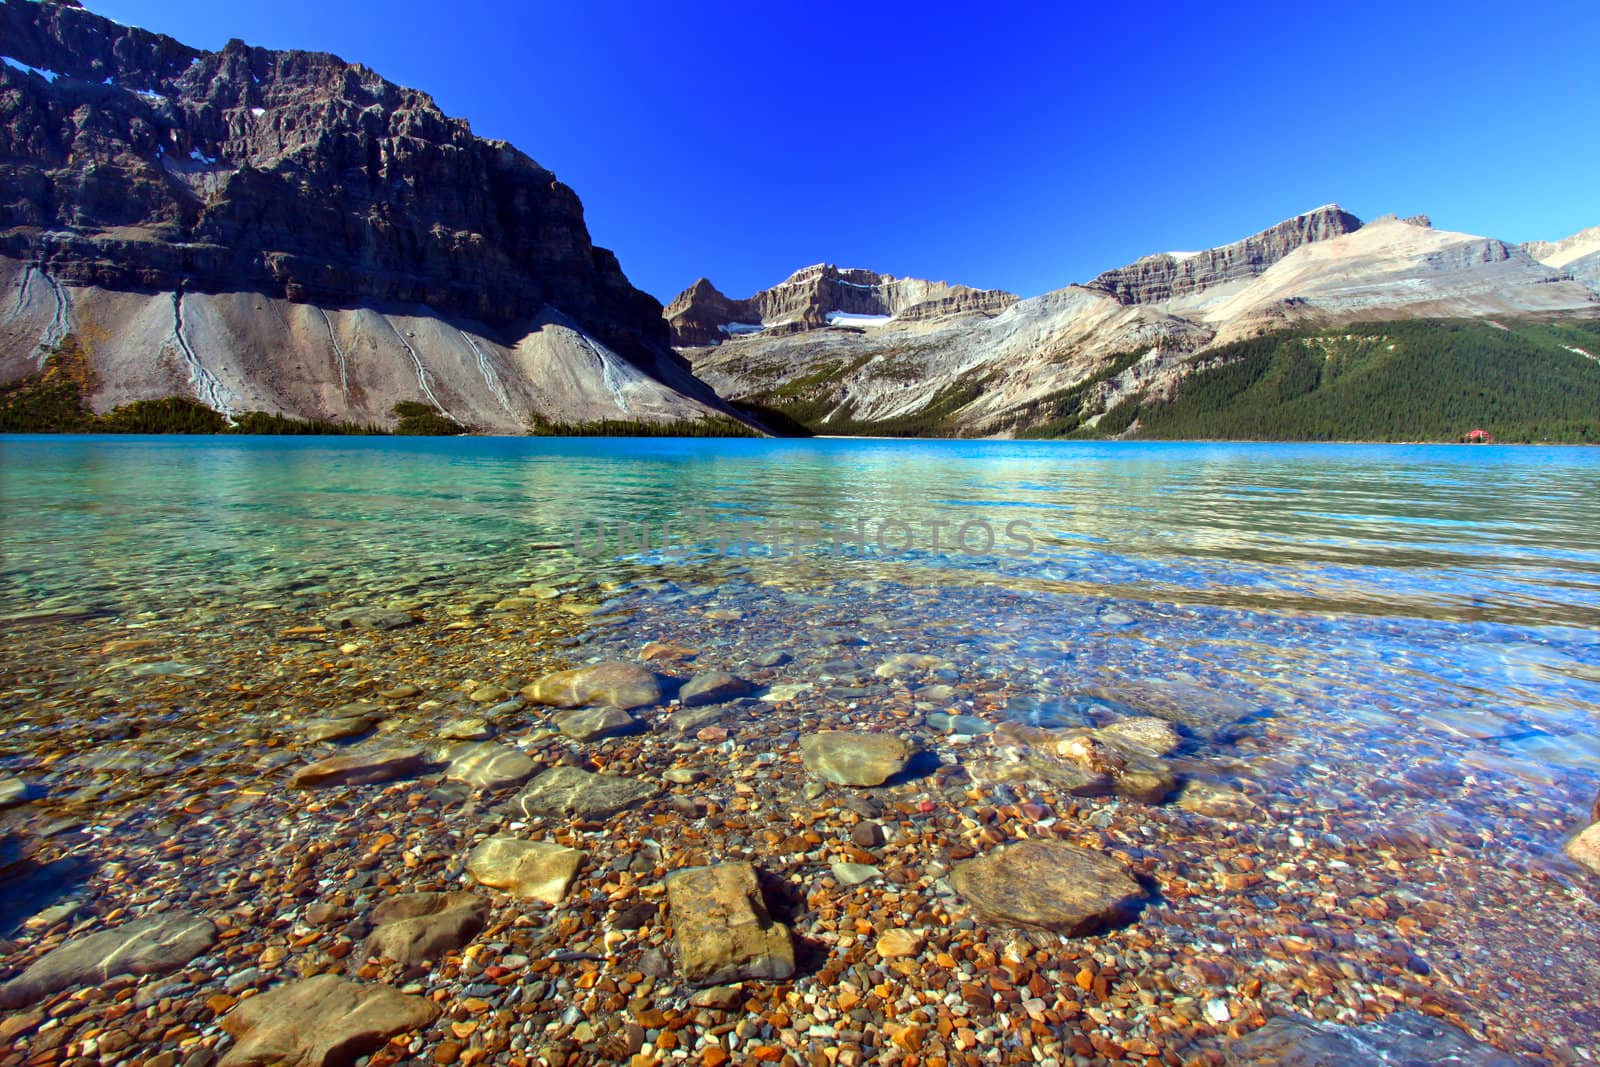 Rocky substrate visible under clear waters of Bow Lake in Banff National Park of Canada.